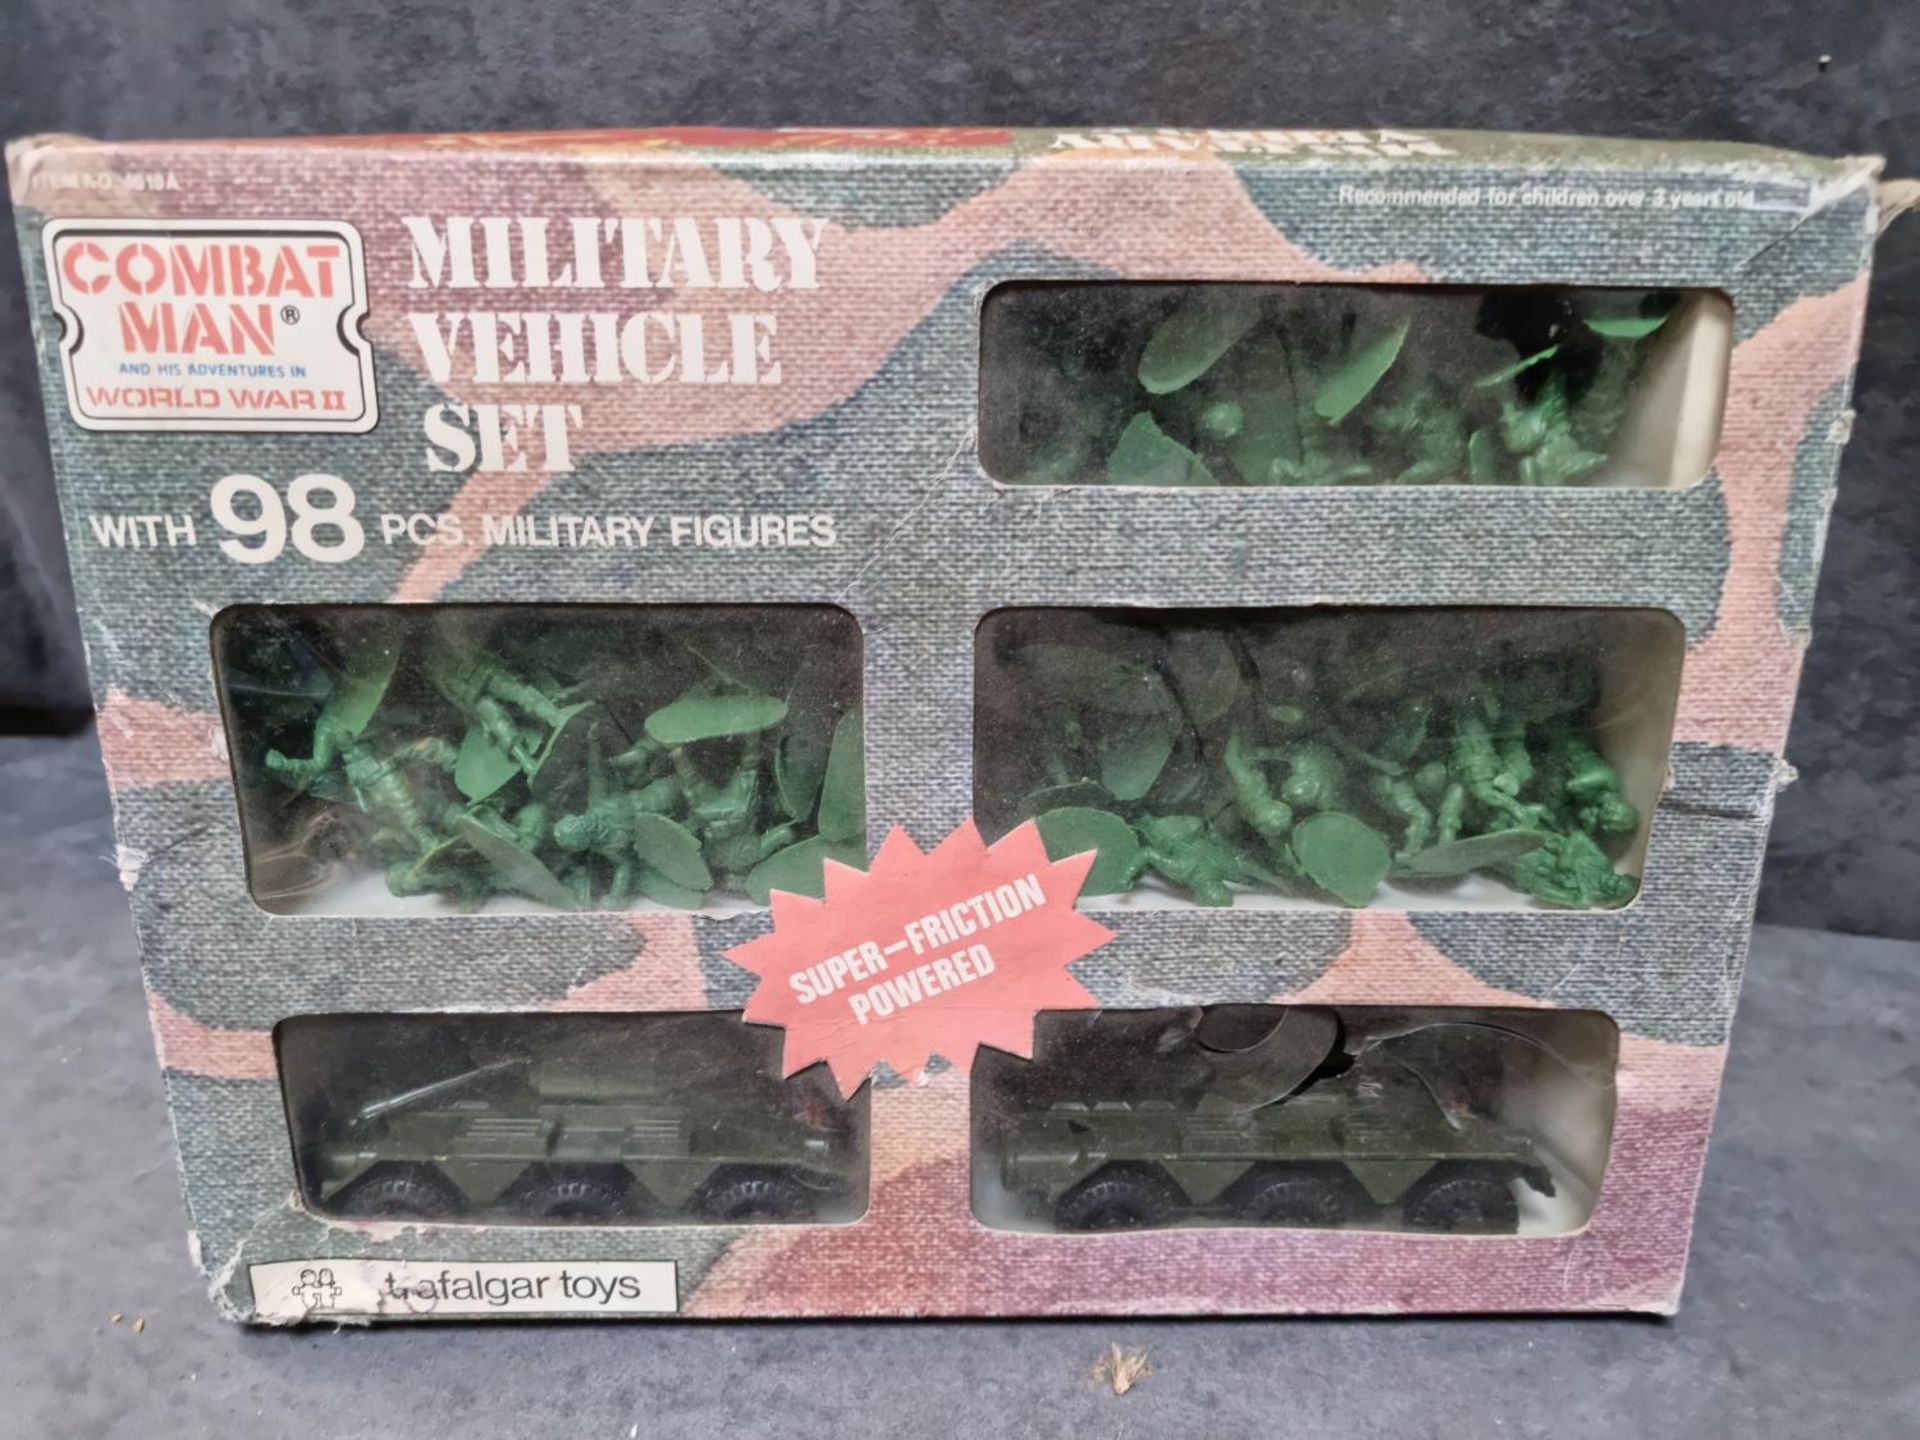 Trafalgar Toys #4619a Military Vehicle Set With 98 Piece Military Figures - Image 3 of 3